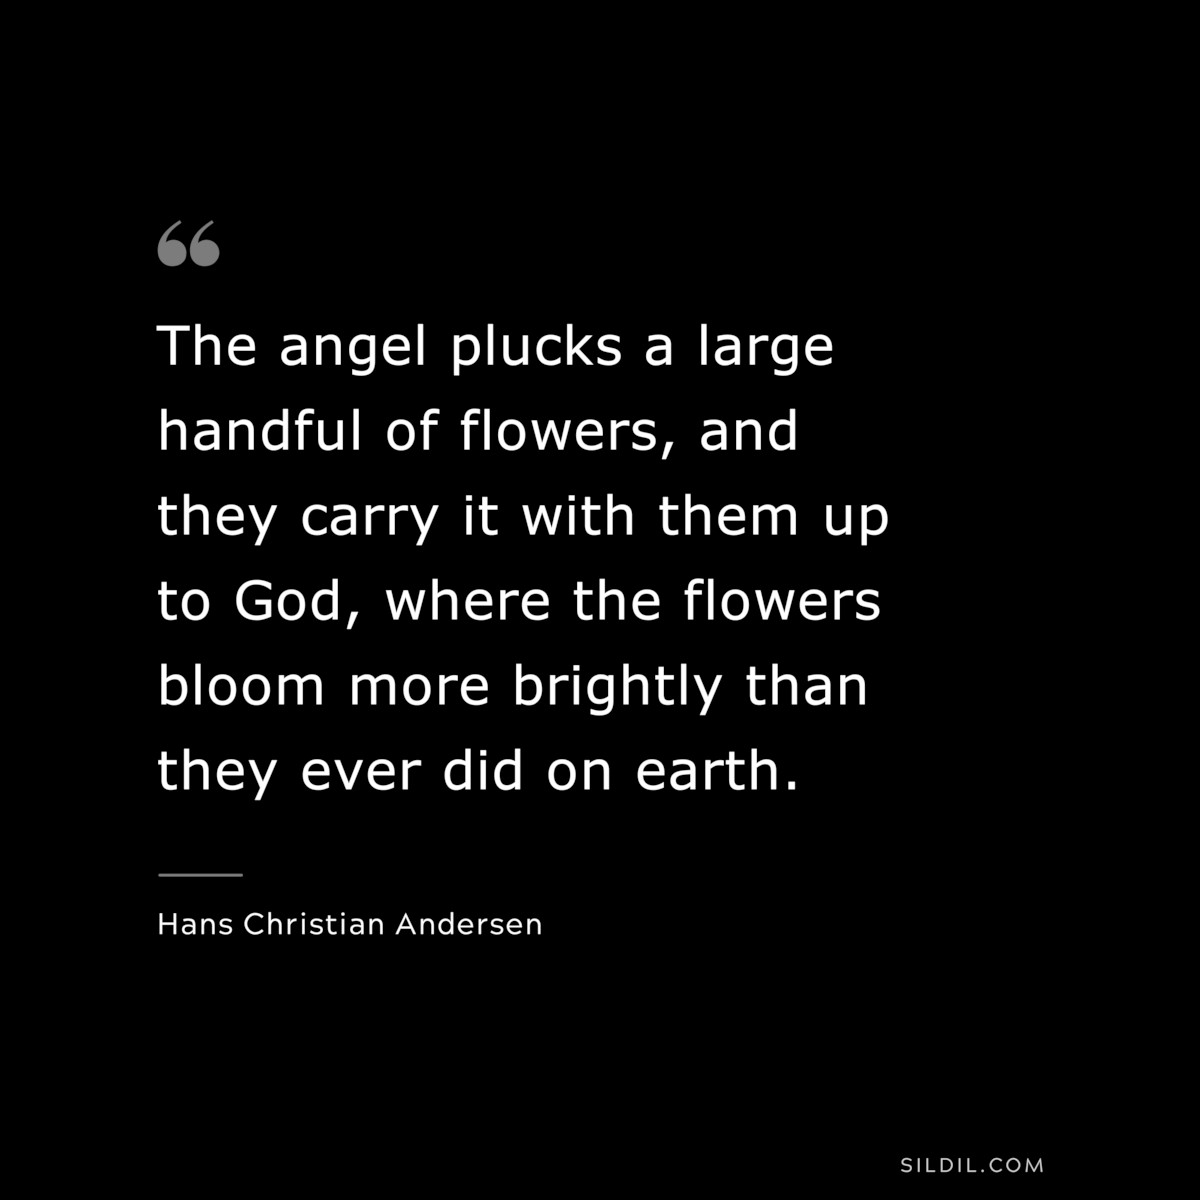 The angel plucks a large handful of flowers, and they carry it with them up to God, where the flowers bloom more brightly than they ever did on earth. ― Hans Christian Andersen